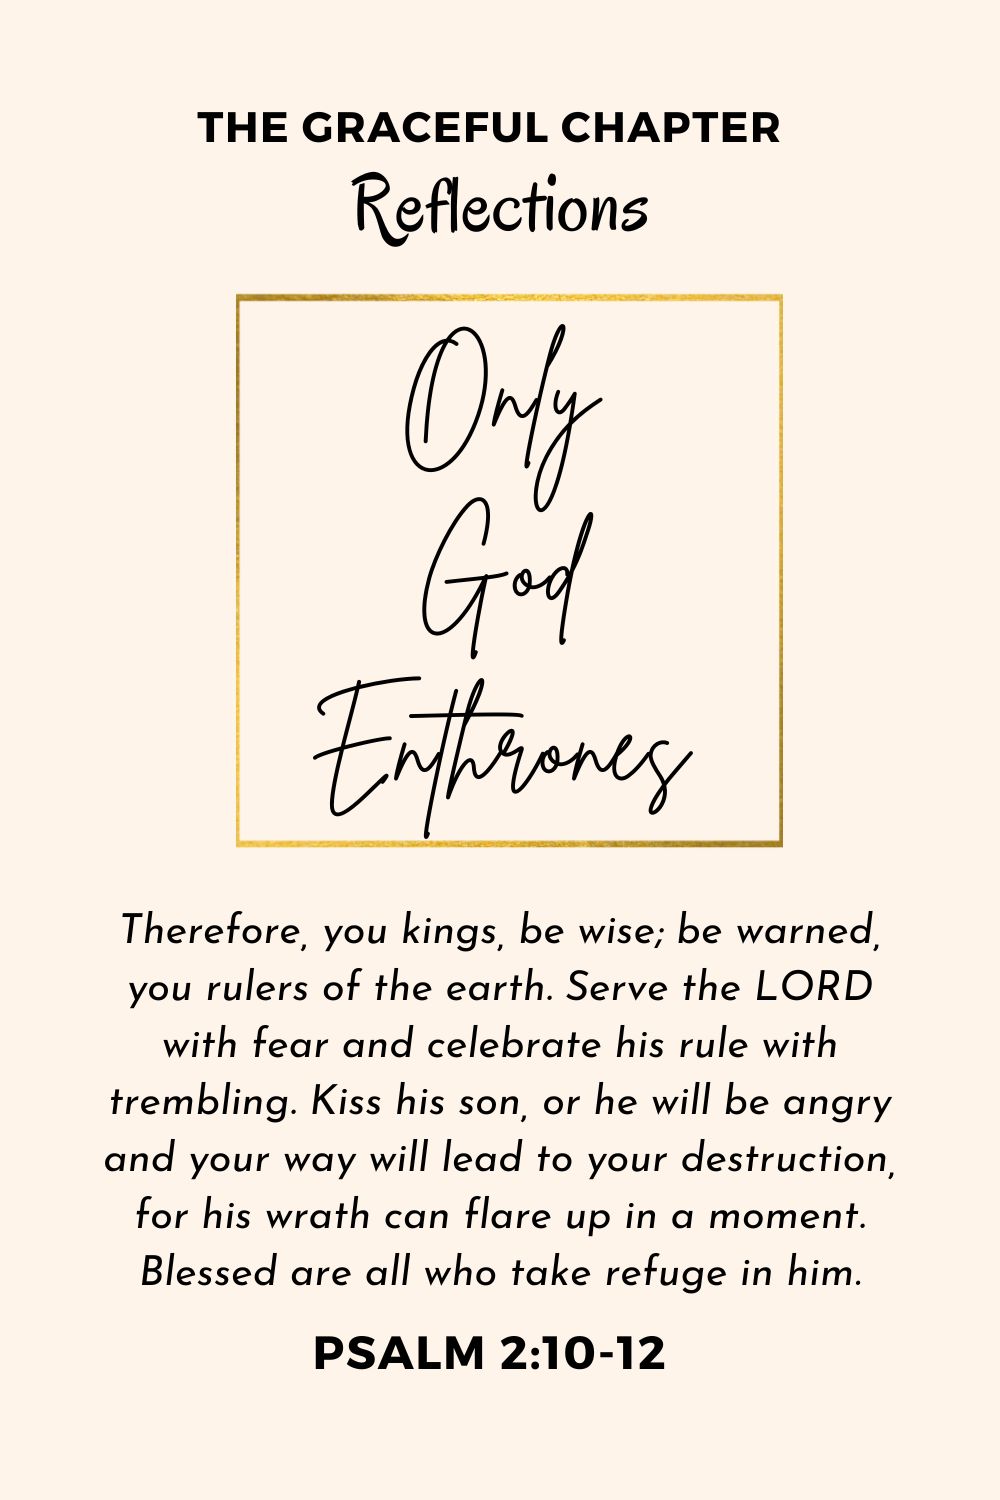 Reflection - Psalm 2:10-12 - Only God Enthrones